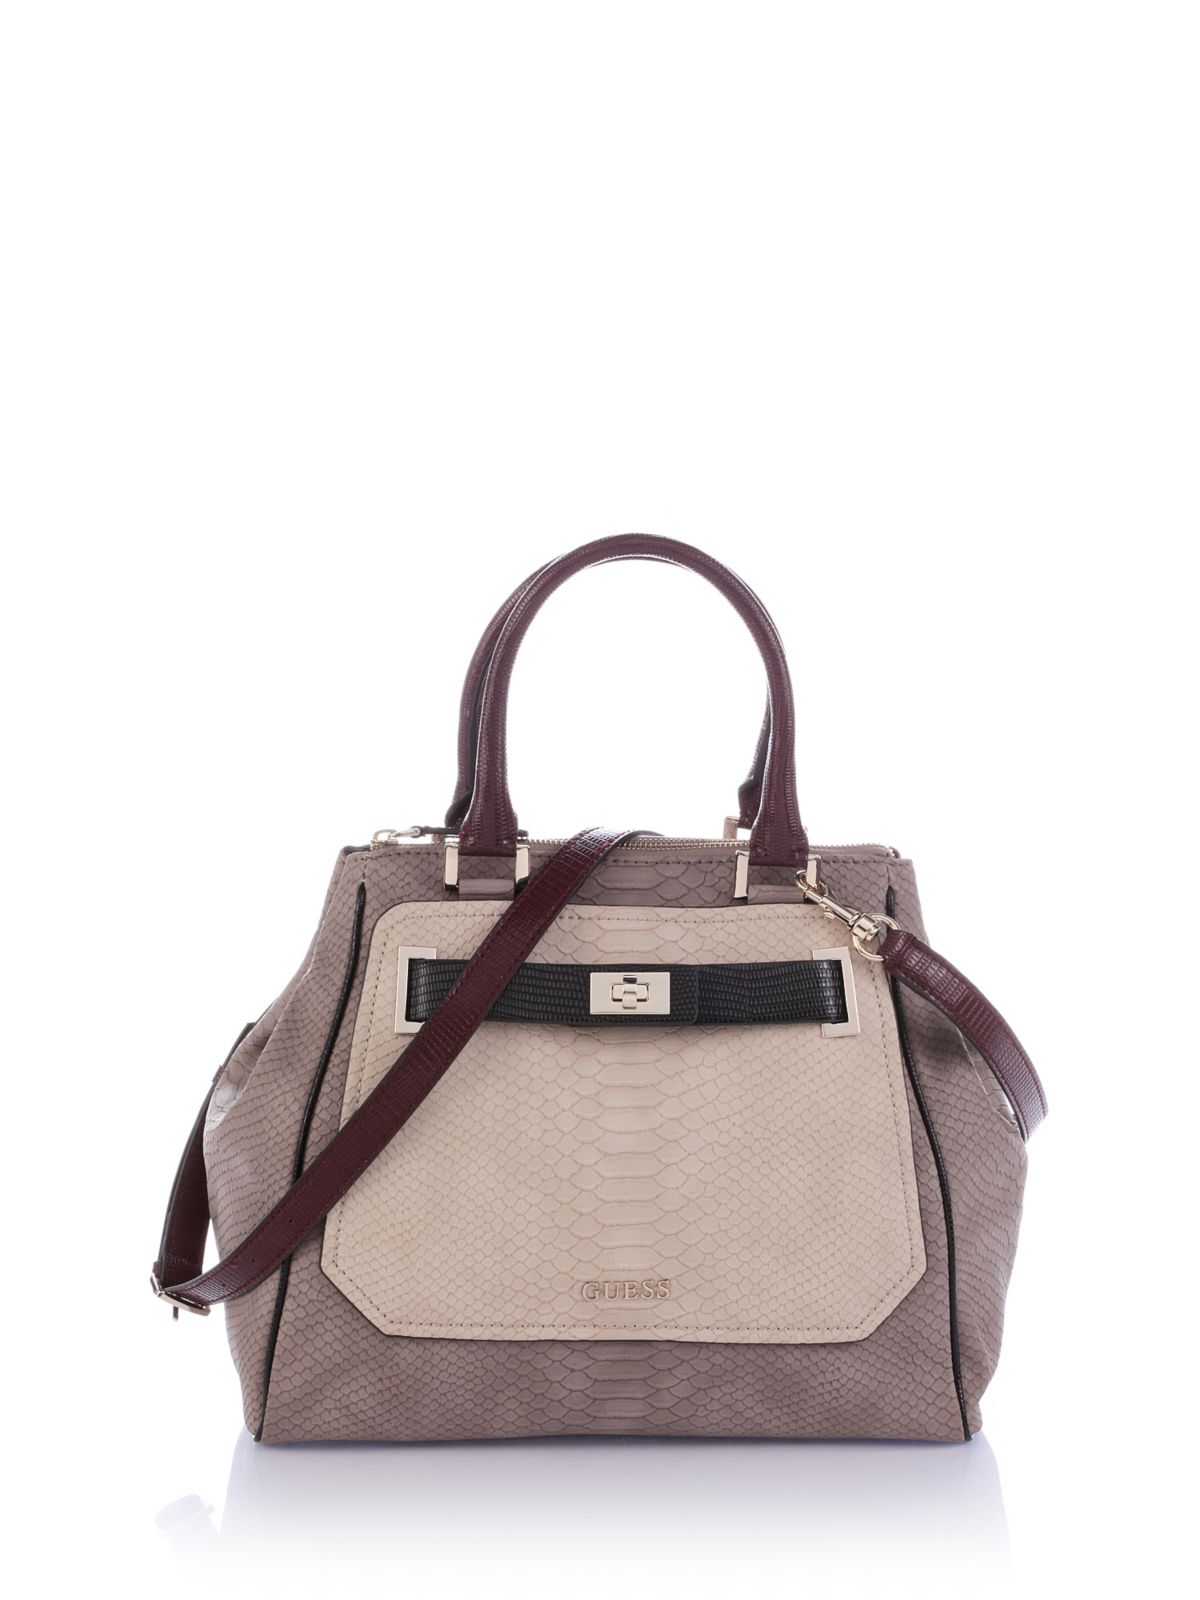 Guess Fryda Trapezoid Tote Bag in Brown (Taupe) | Lyst